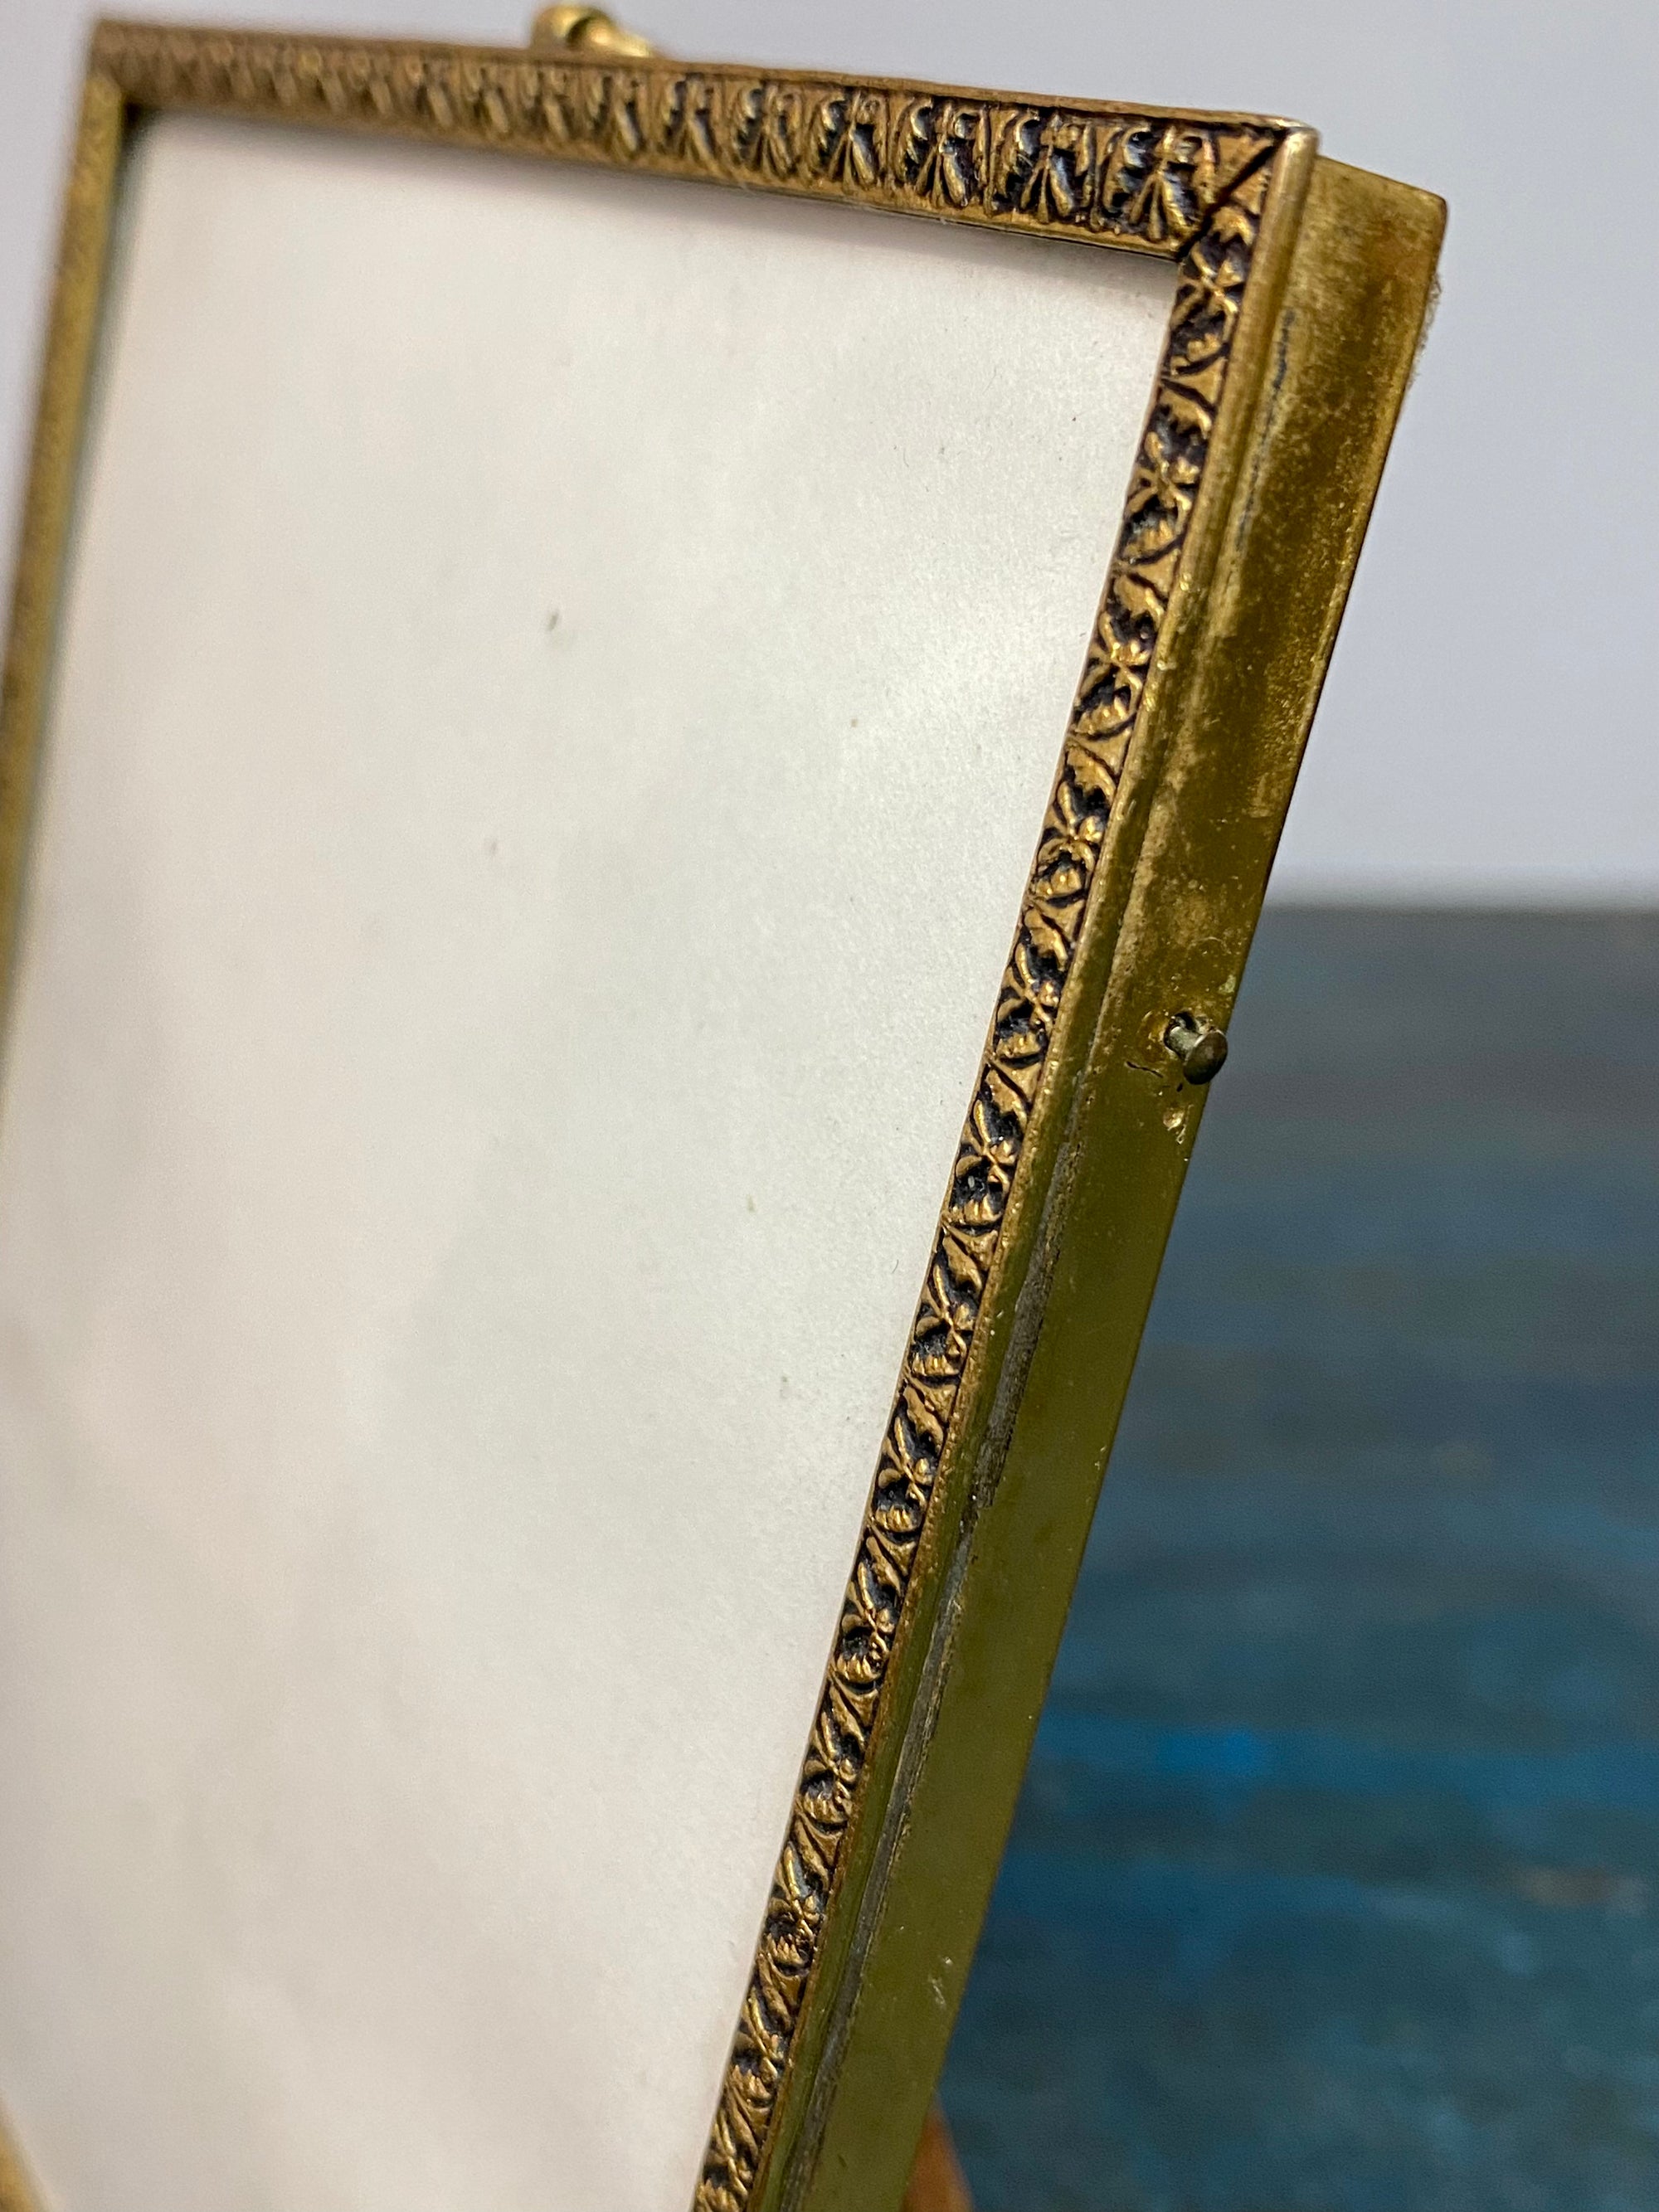 This charming old frame appears to be gilt over brass, with a repeating border, ring at the top and a stand. The original back is covered in brown velvet and fits into the frame via side pins. Our vintage frame shows wear but is in good condition. Circa 1930, England. Outside frame 12.3 x 9.5 cm, inside 11.2 x 8.7 cm.